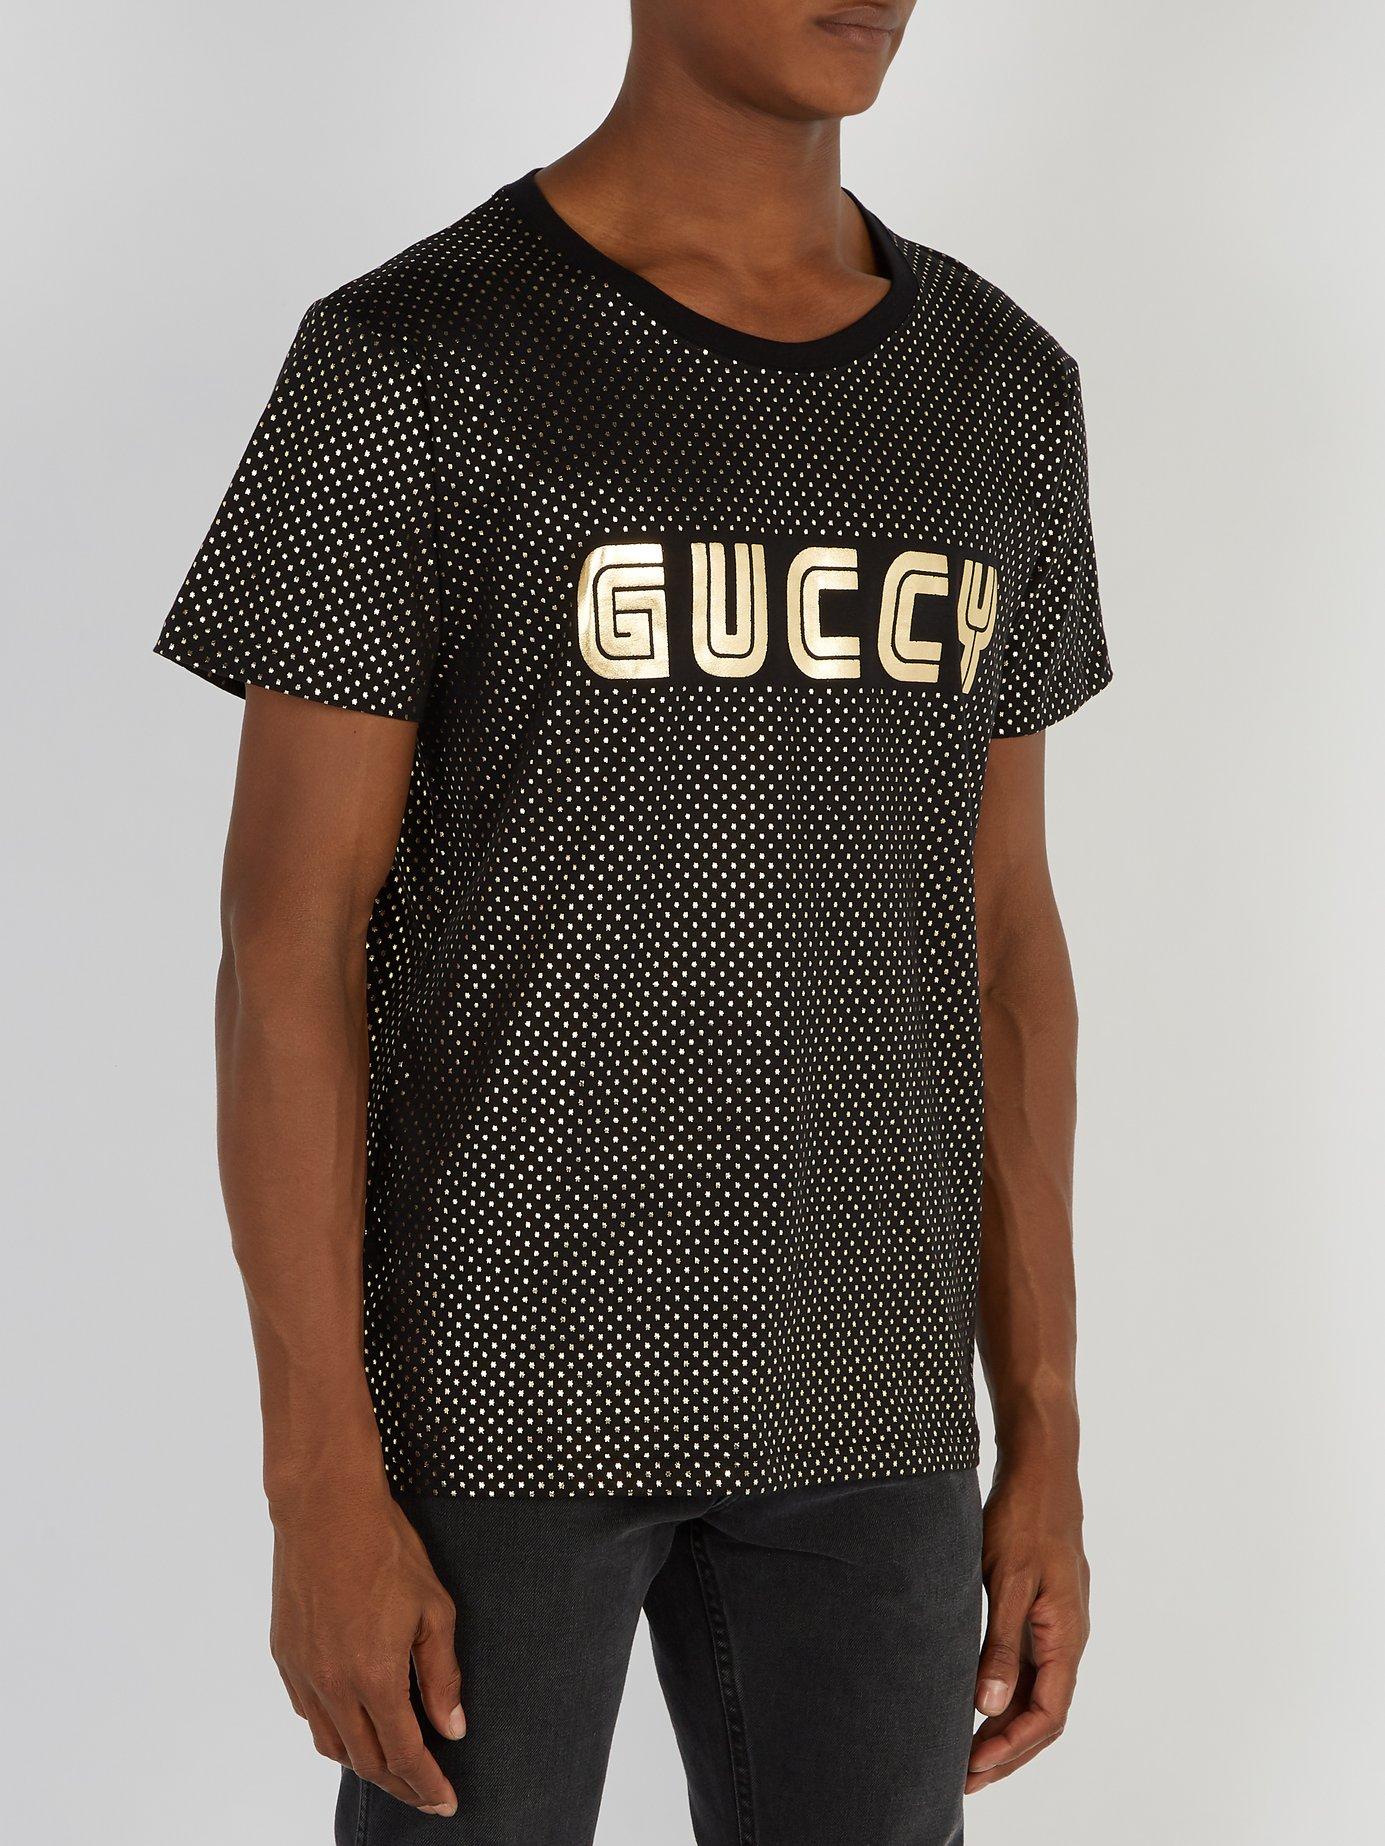 Gucci Star Print Cotton Jersey T Shirt in Black for Men - Lyst